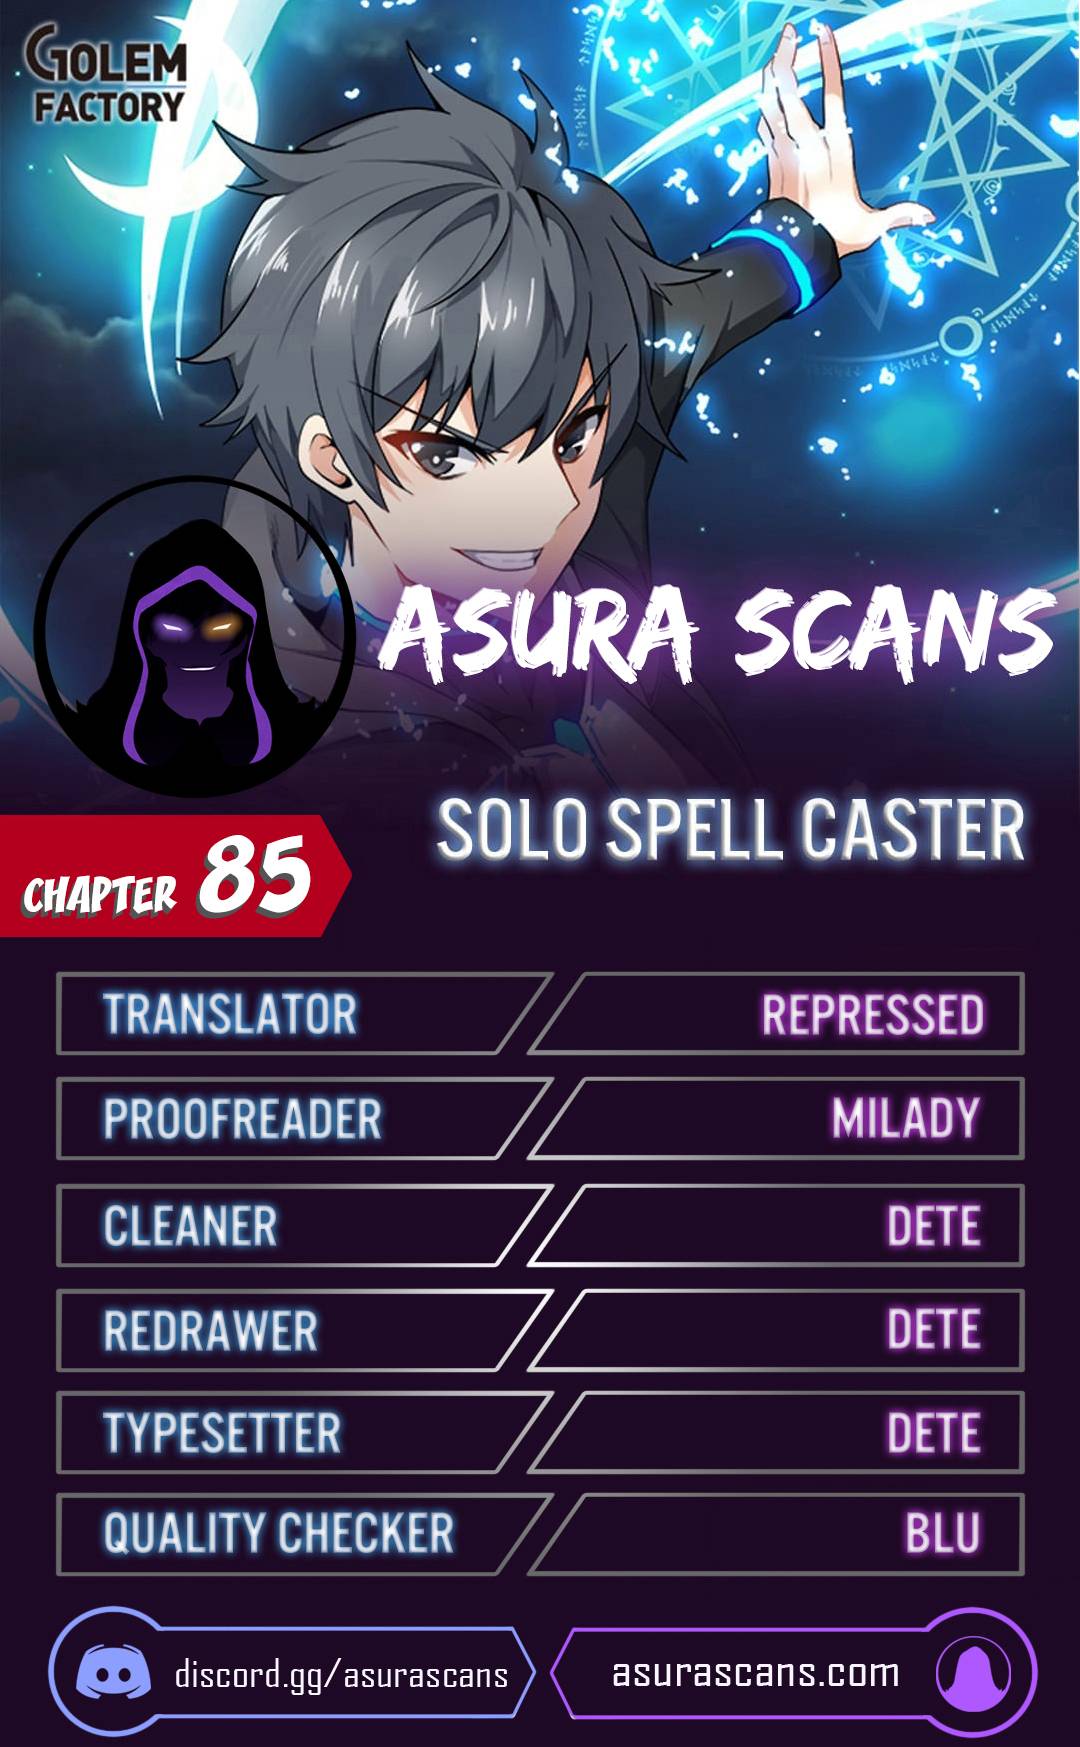 Read Solo Spell Caster Manga English [New Chapters] Online Free ...